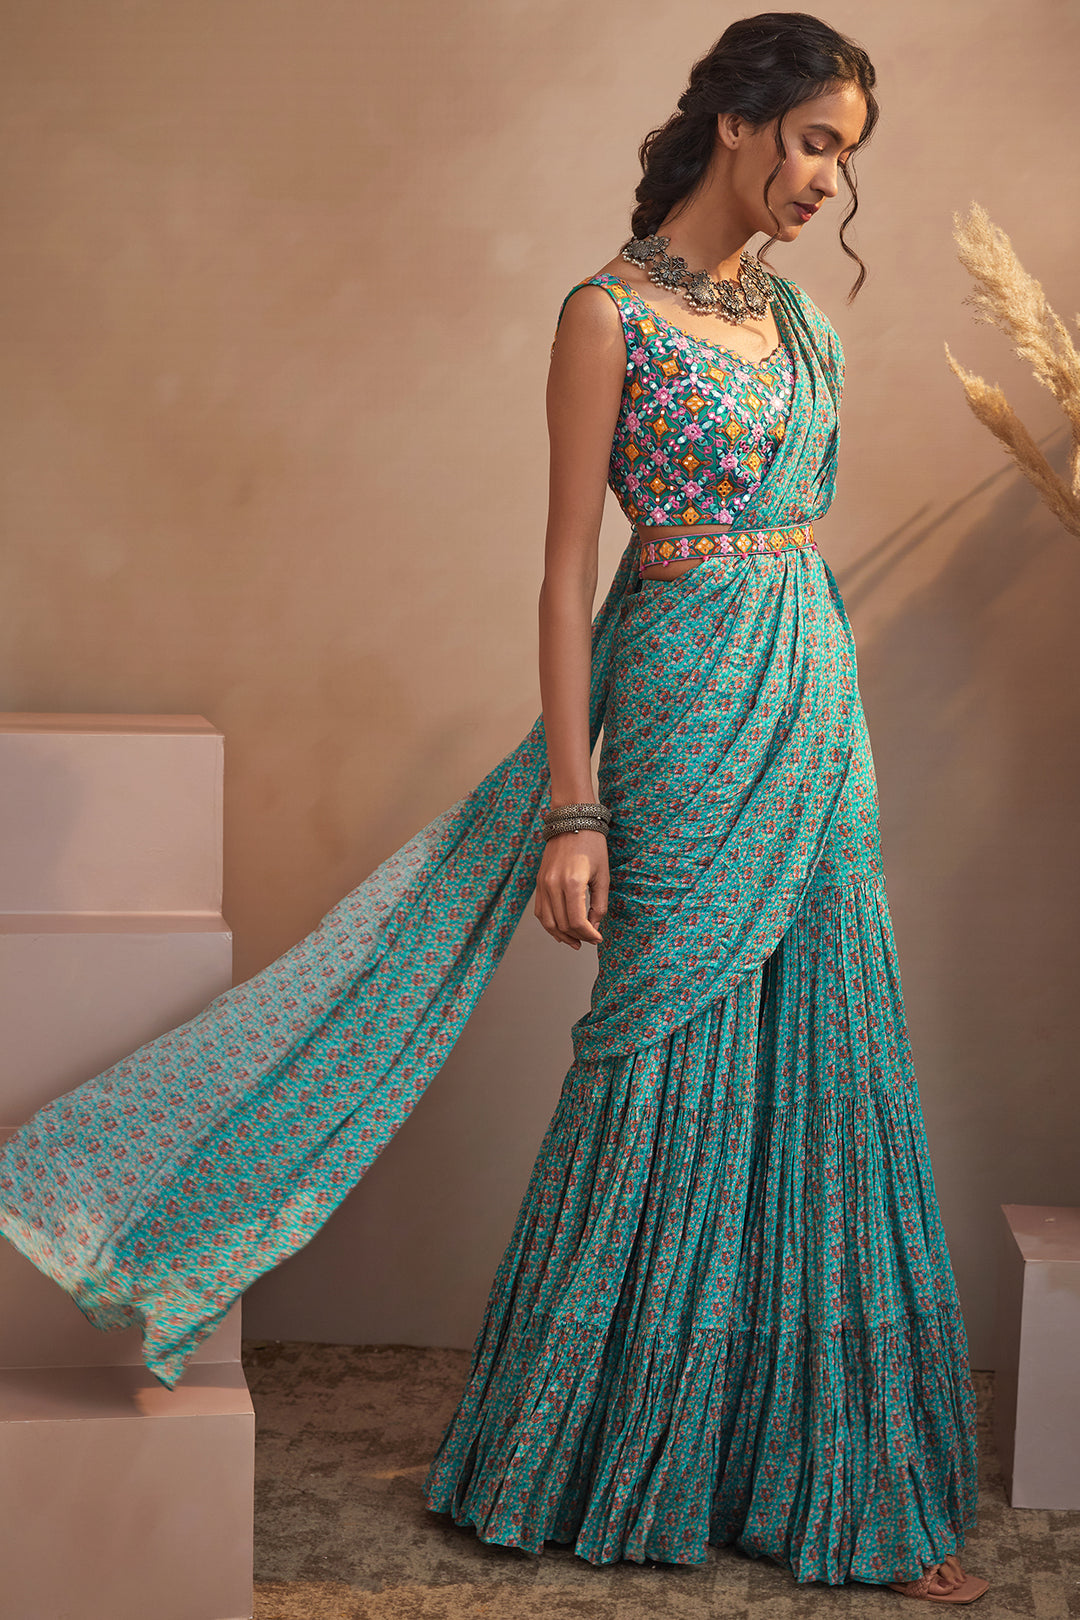 Bridal indo-western outfits